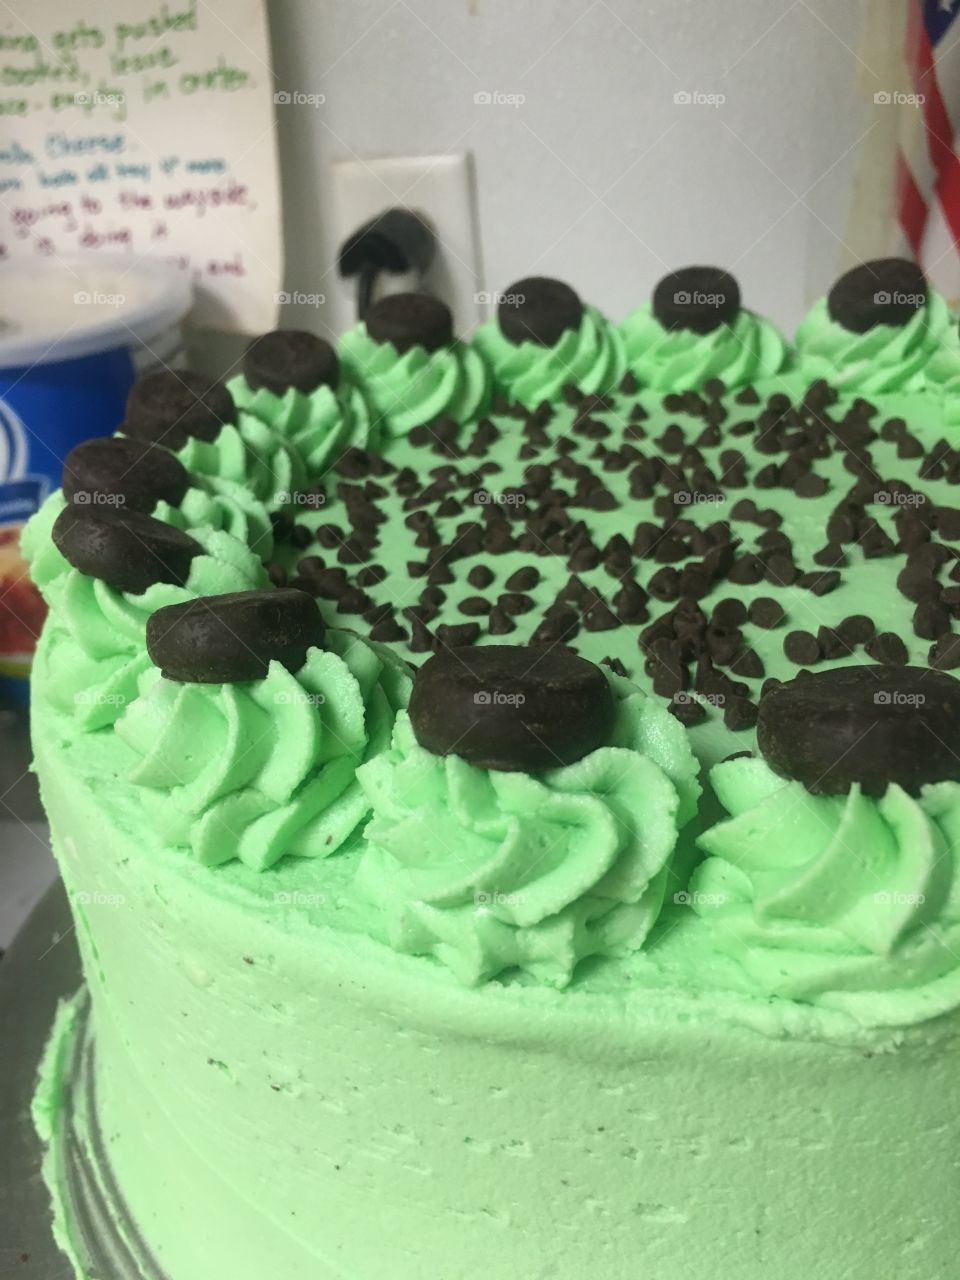 Mint chocolate cake! Chocolate cake, mint frosting, topped with York peppermint patties and mini chocolate chips